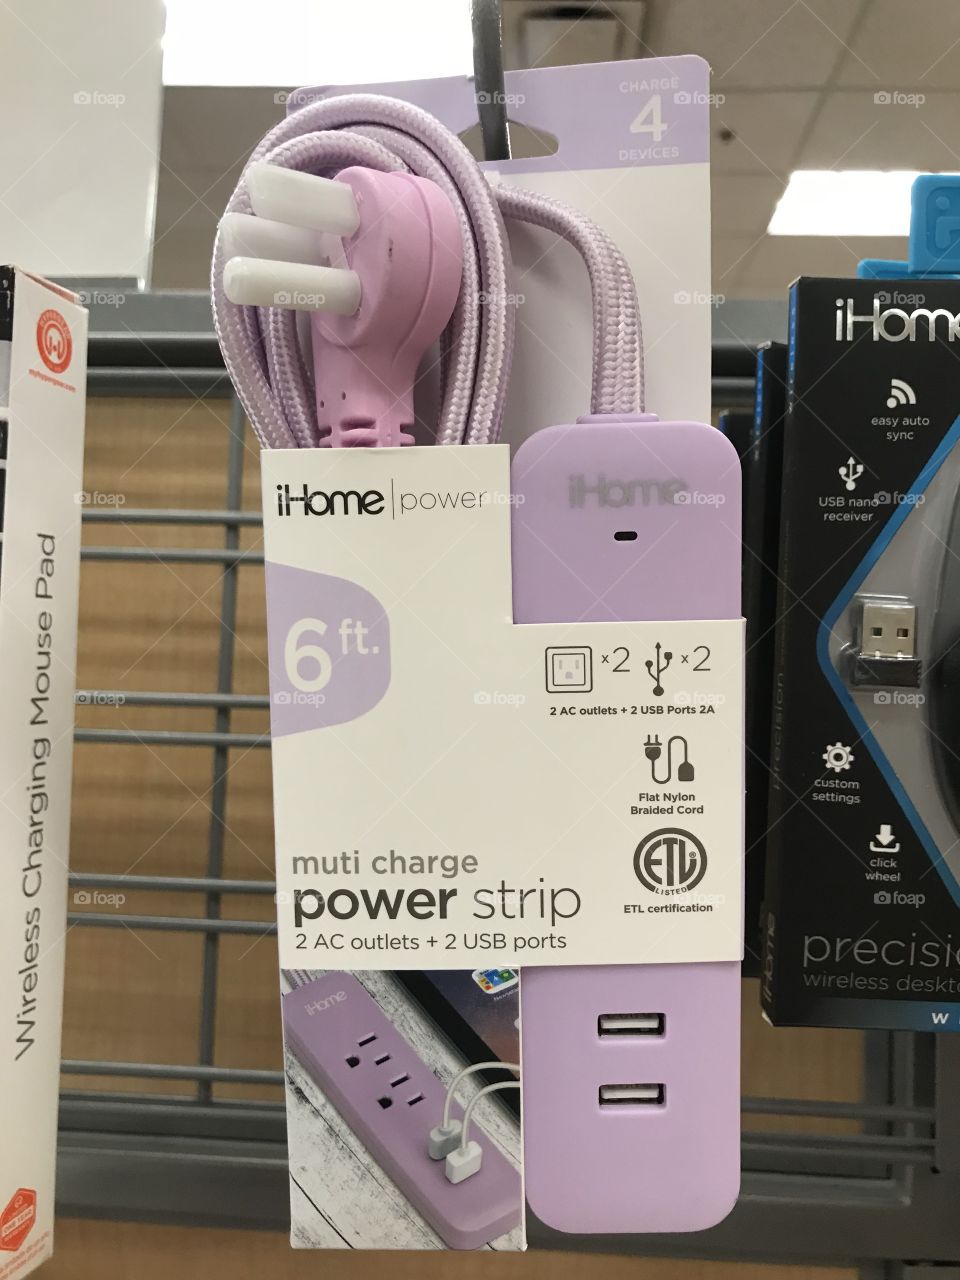 Photo of a purple electronics product as seen on a shopping trip to a nearby mall store